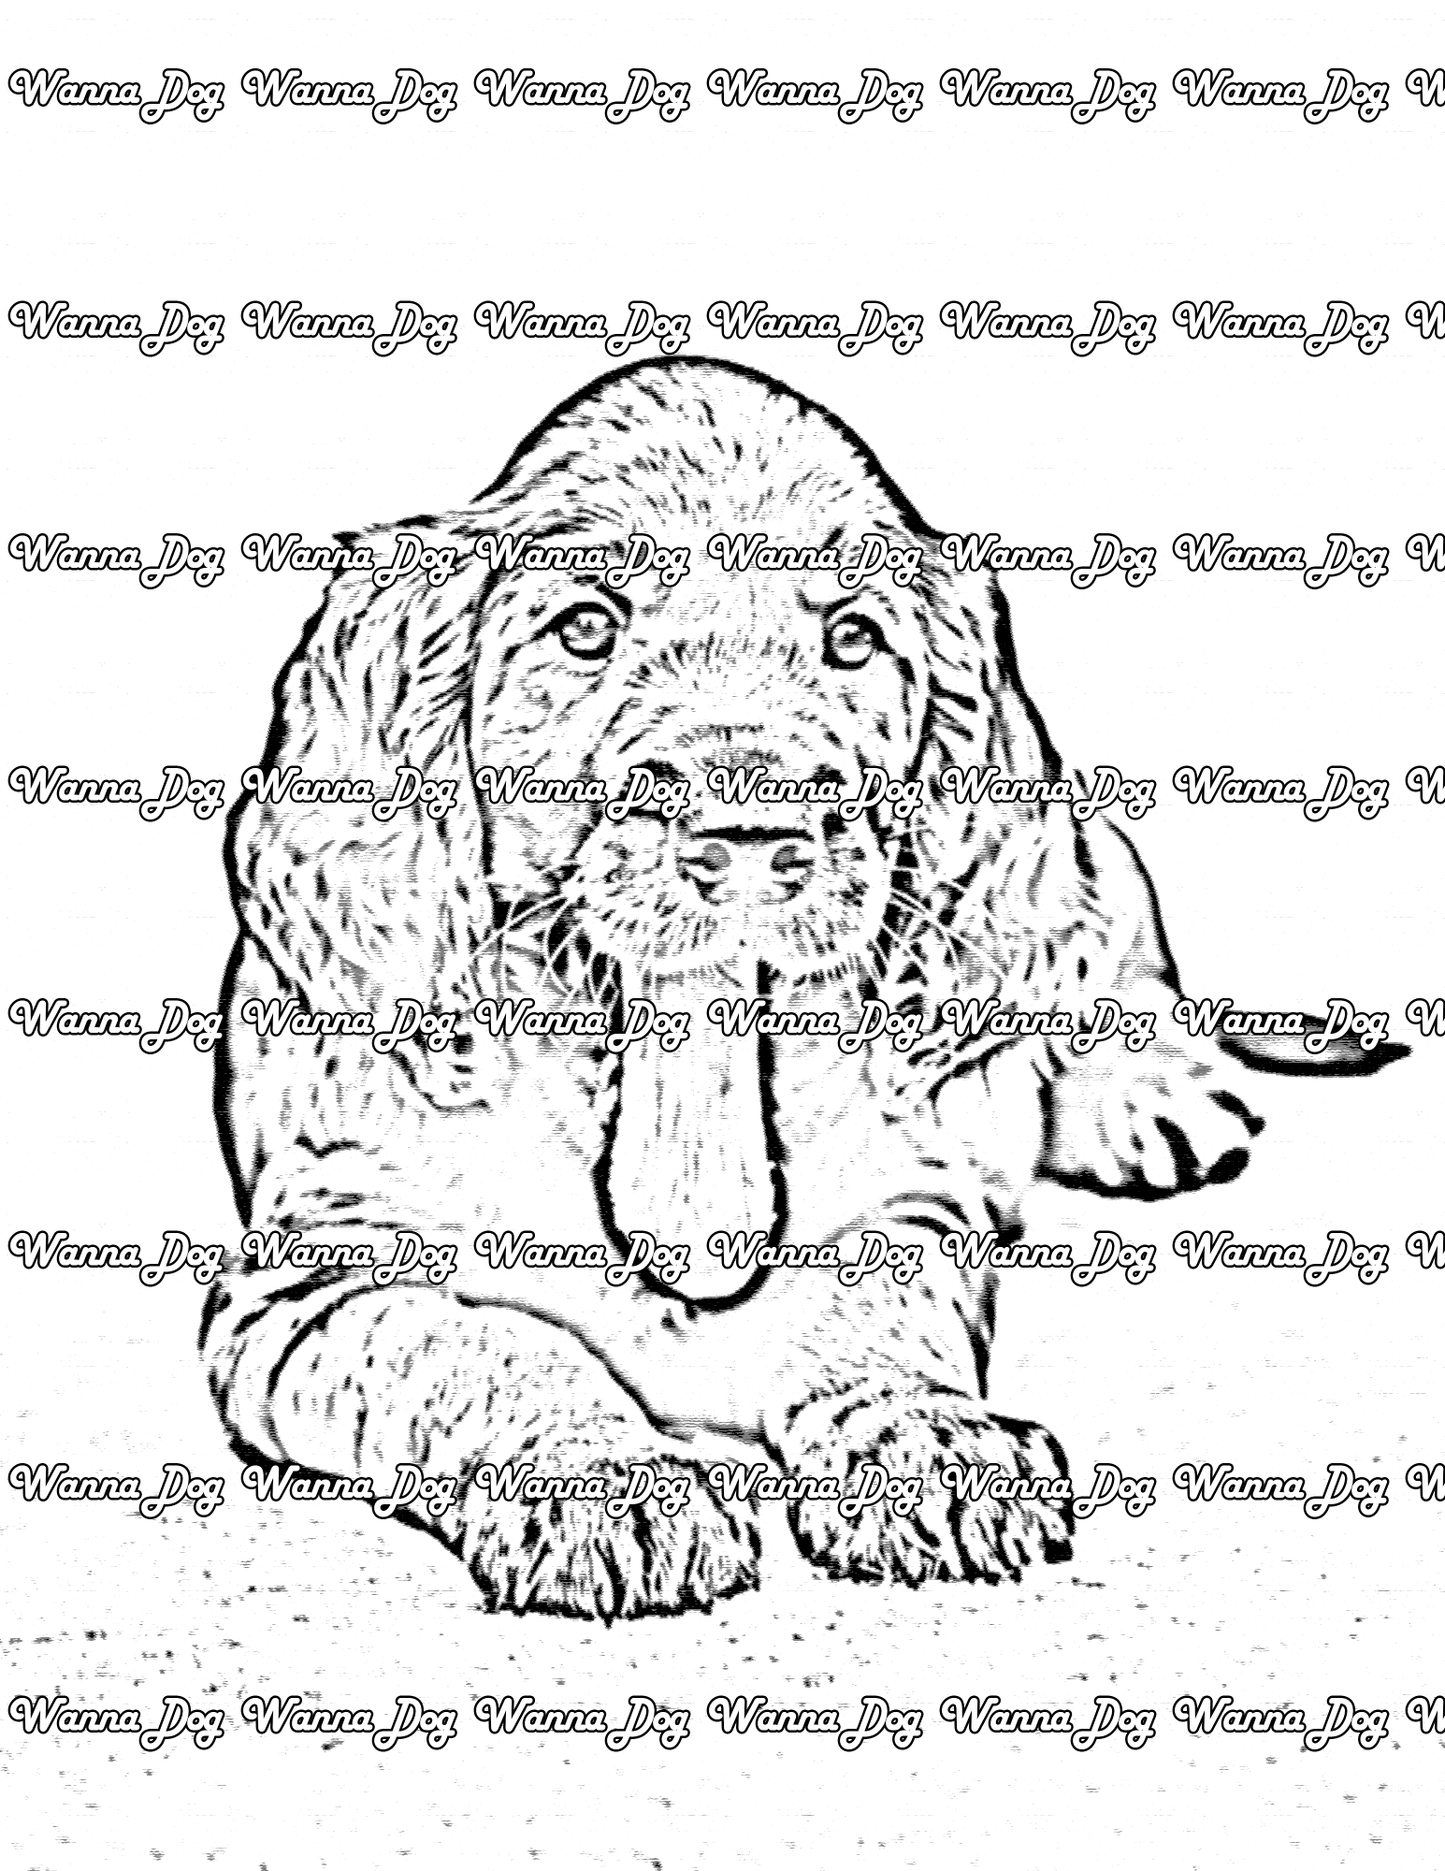 Irish Setter Coloring Page of a Irish Setter puppy with their tongue out